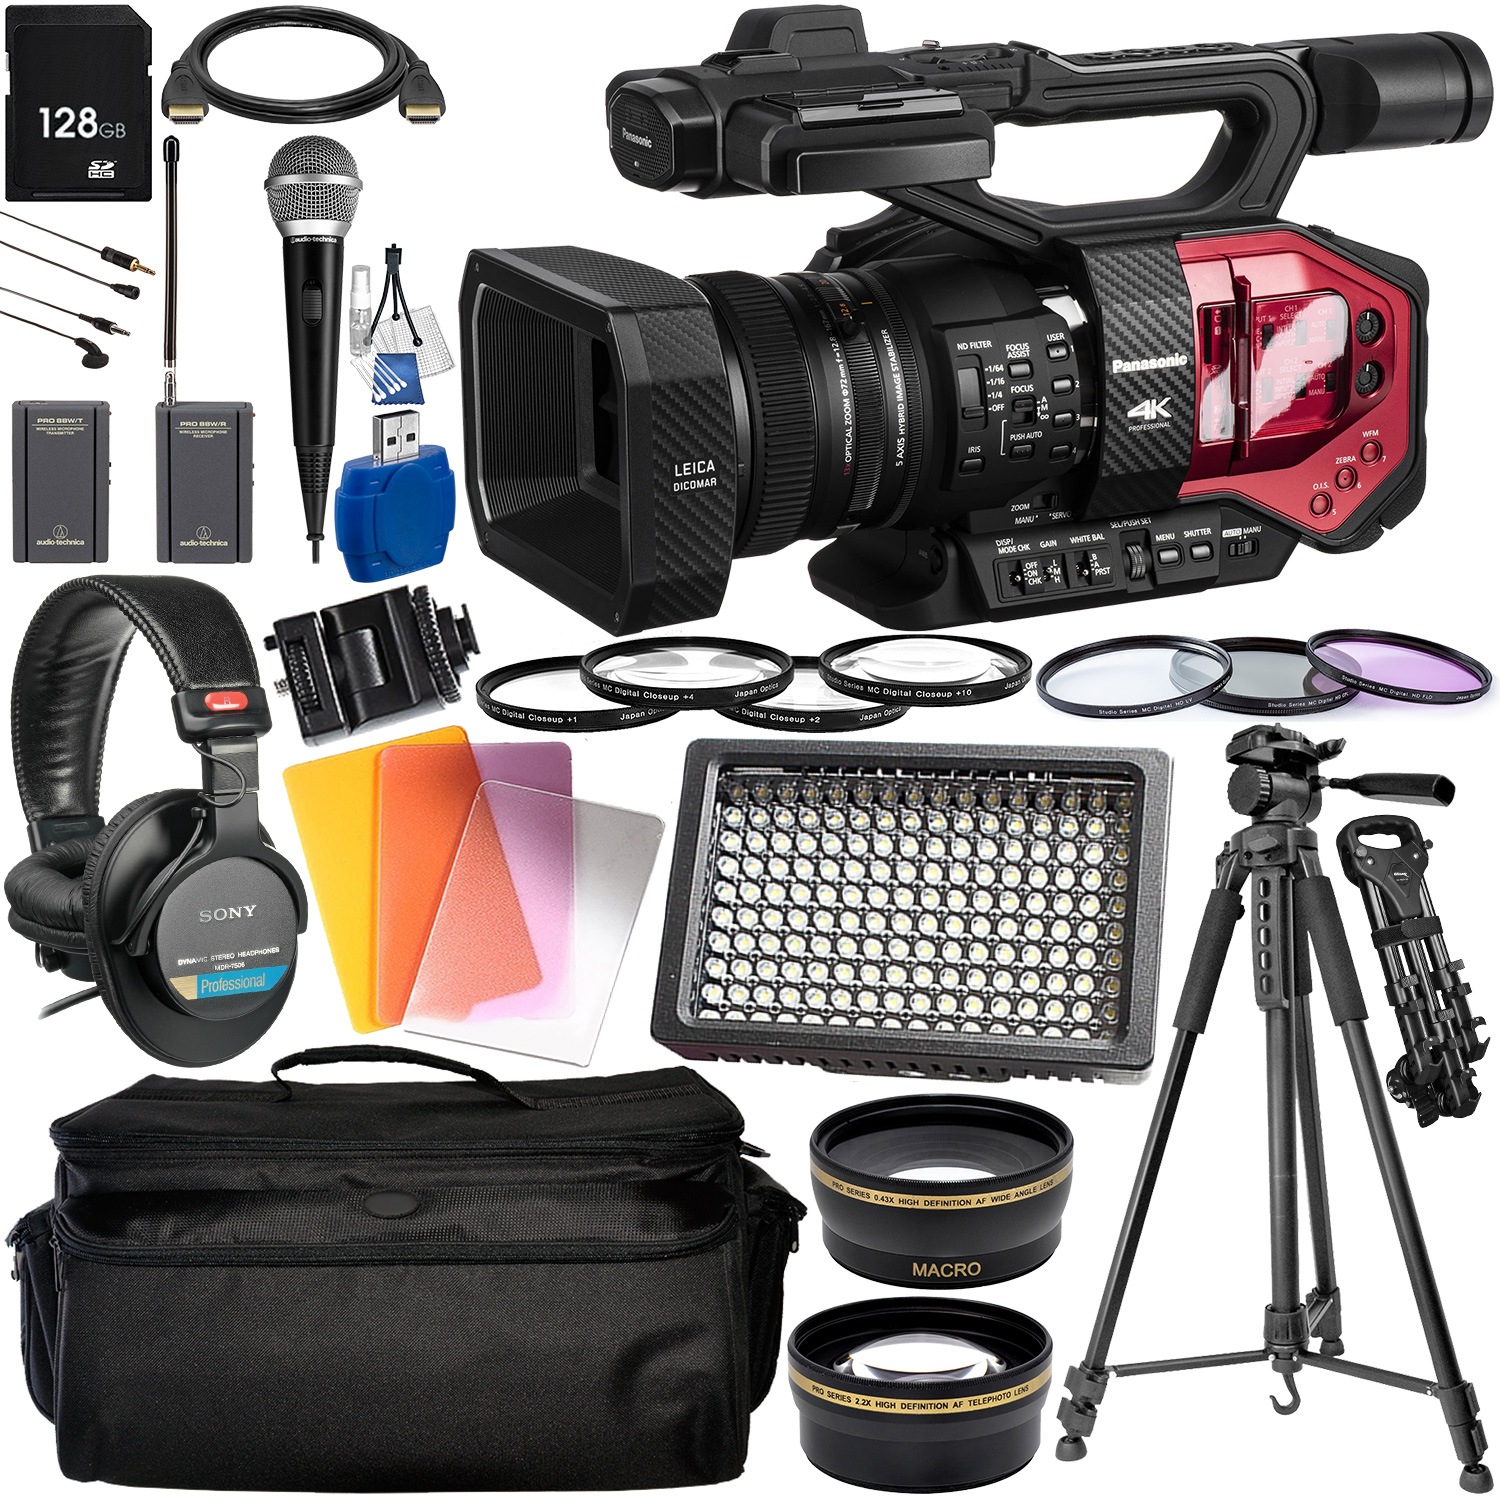 Panasonic AG-DVX200 4K Professional Camcorder with Deluxe Accessory Bundle